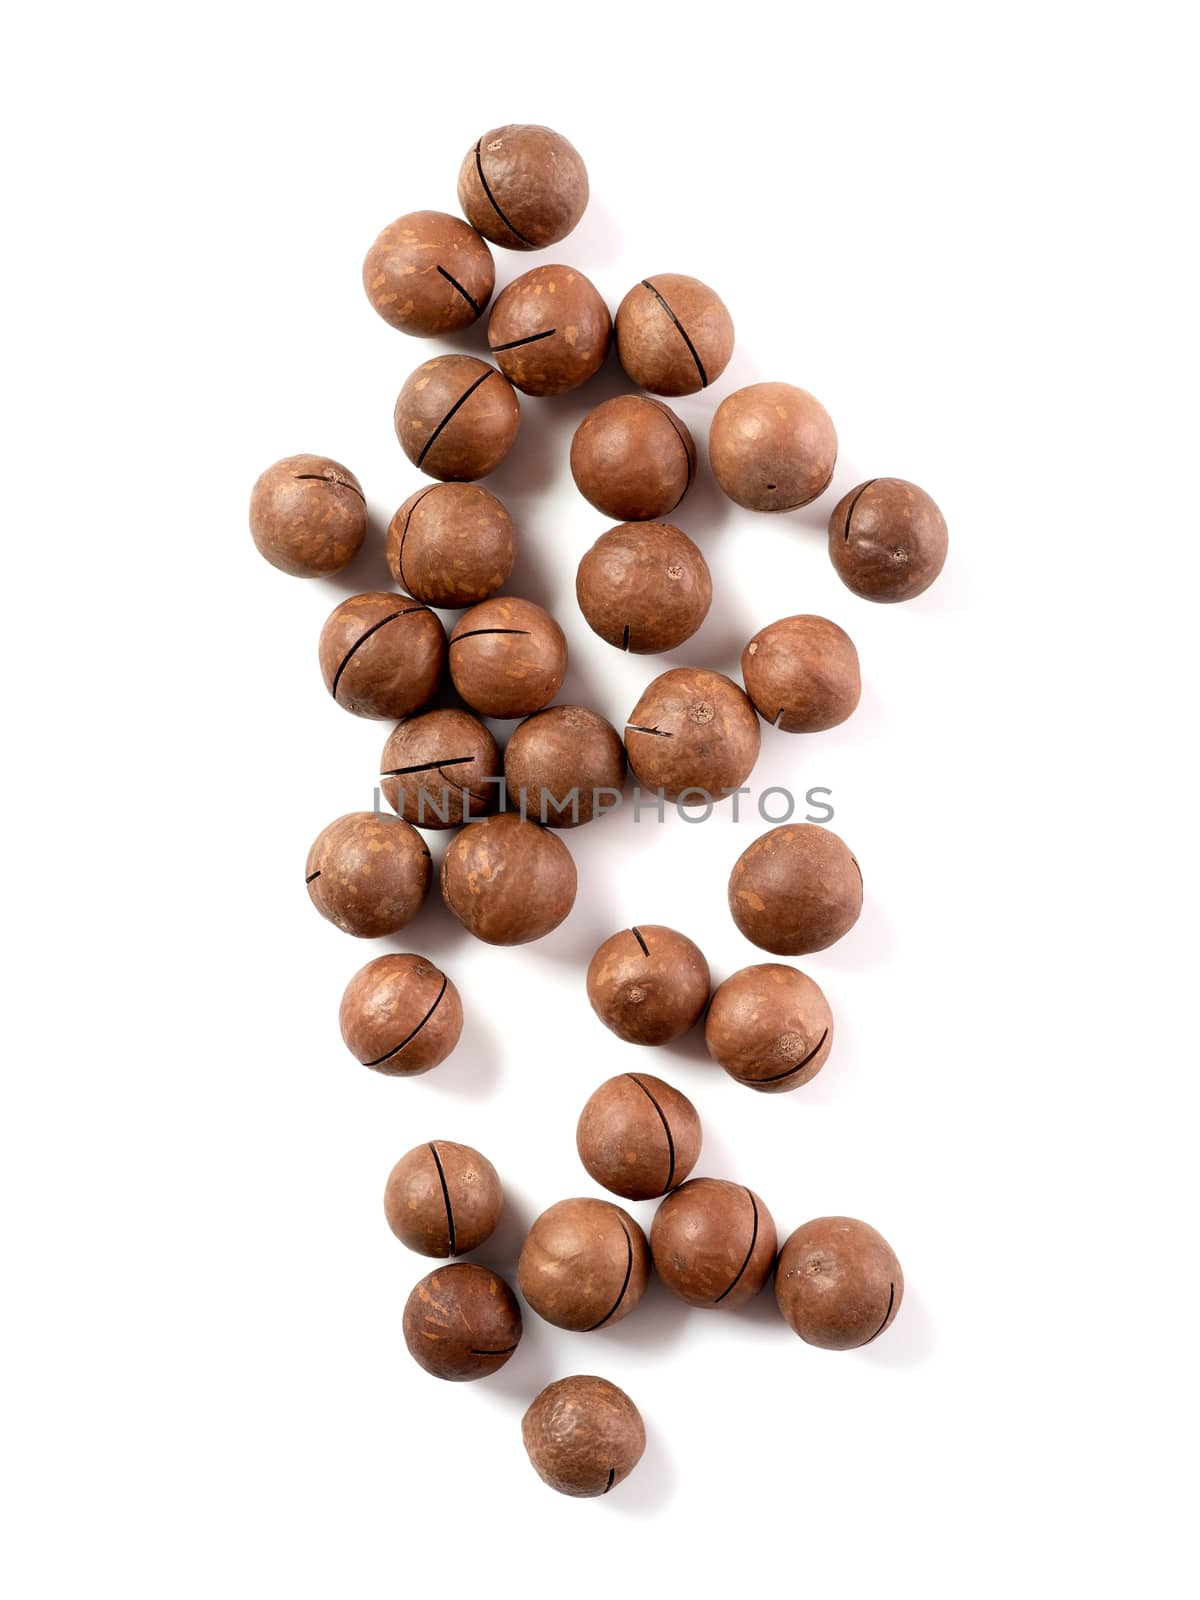 Heap of macadamia nuts on white background with clipping path.. Set of macadamia nuts isolated on white, top view or flat lay. Vertical